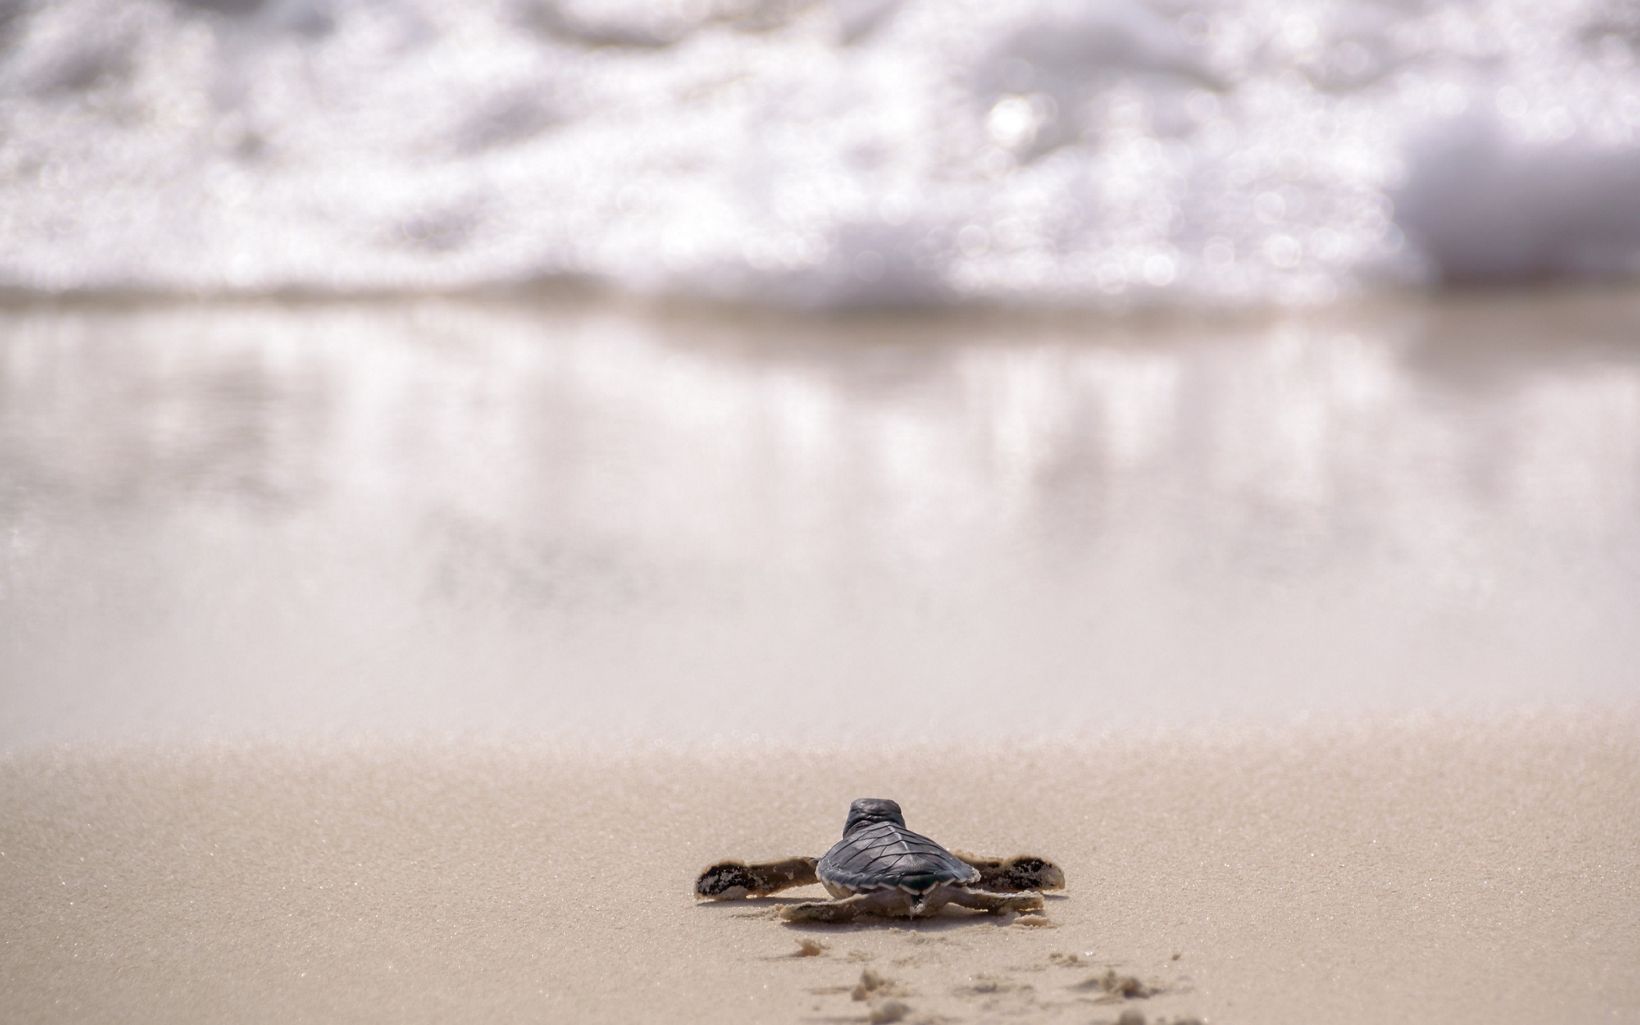 A baby turtle waddles on the sand on its way toward the ocean.